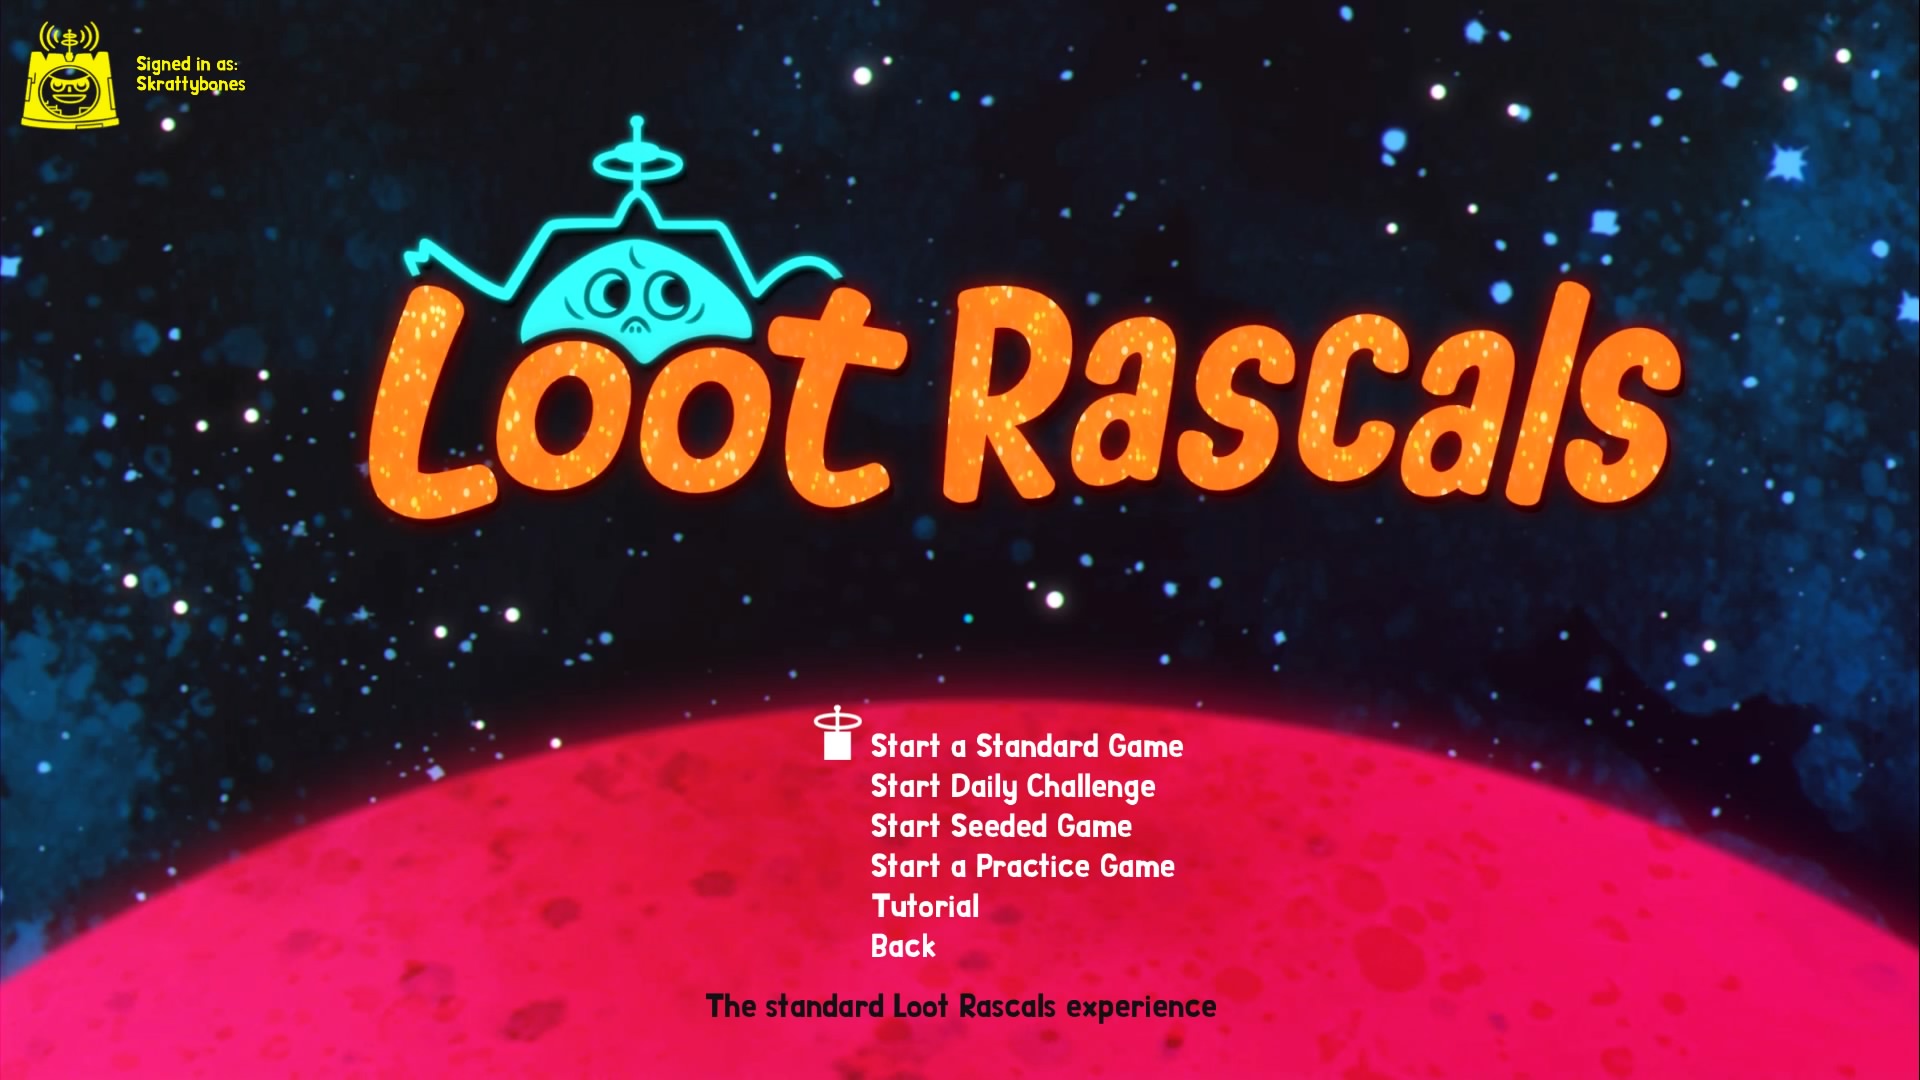 Review: Loot Rascals